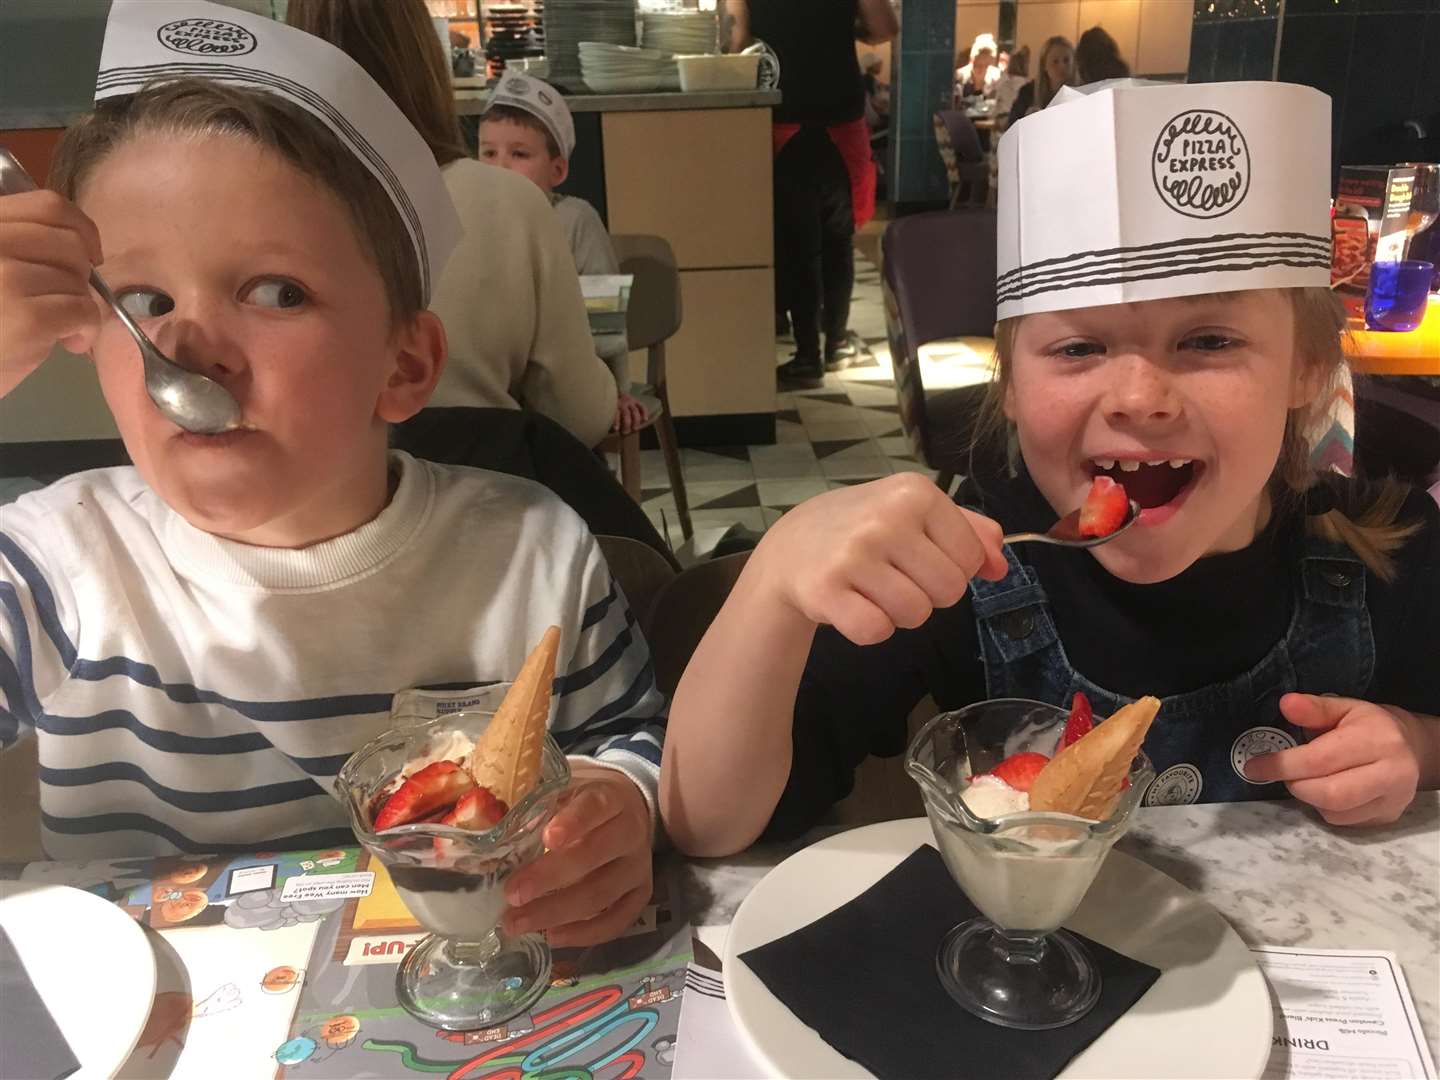 Oscar and Amber, both 7, enjoy their well-deserved puddings.